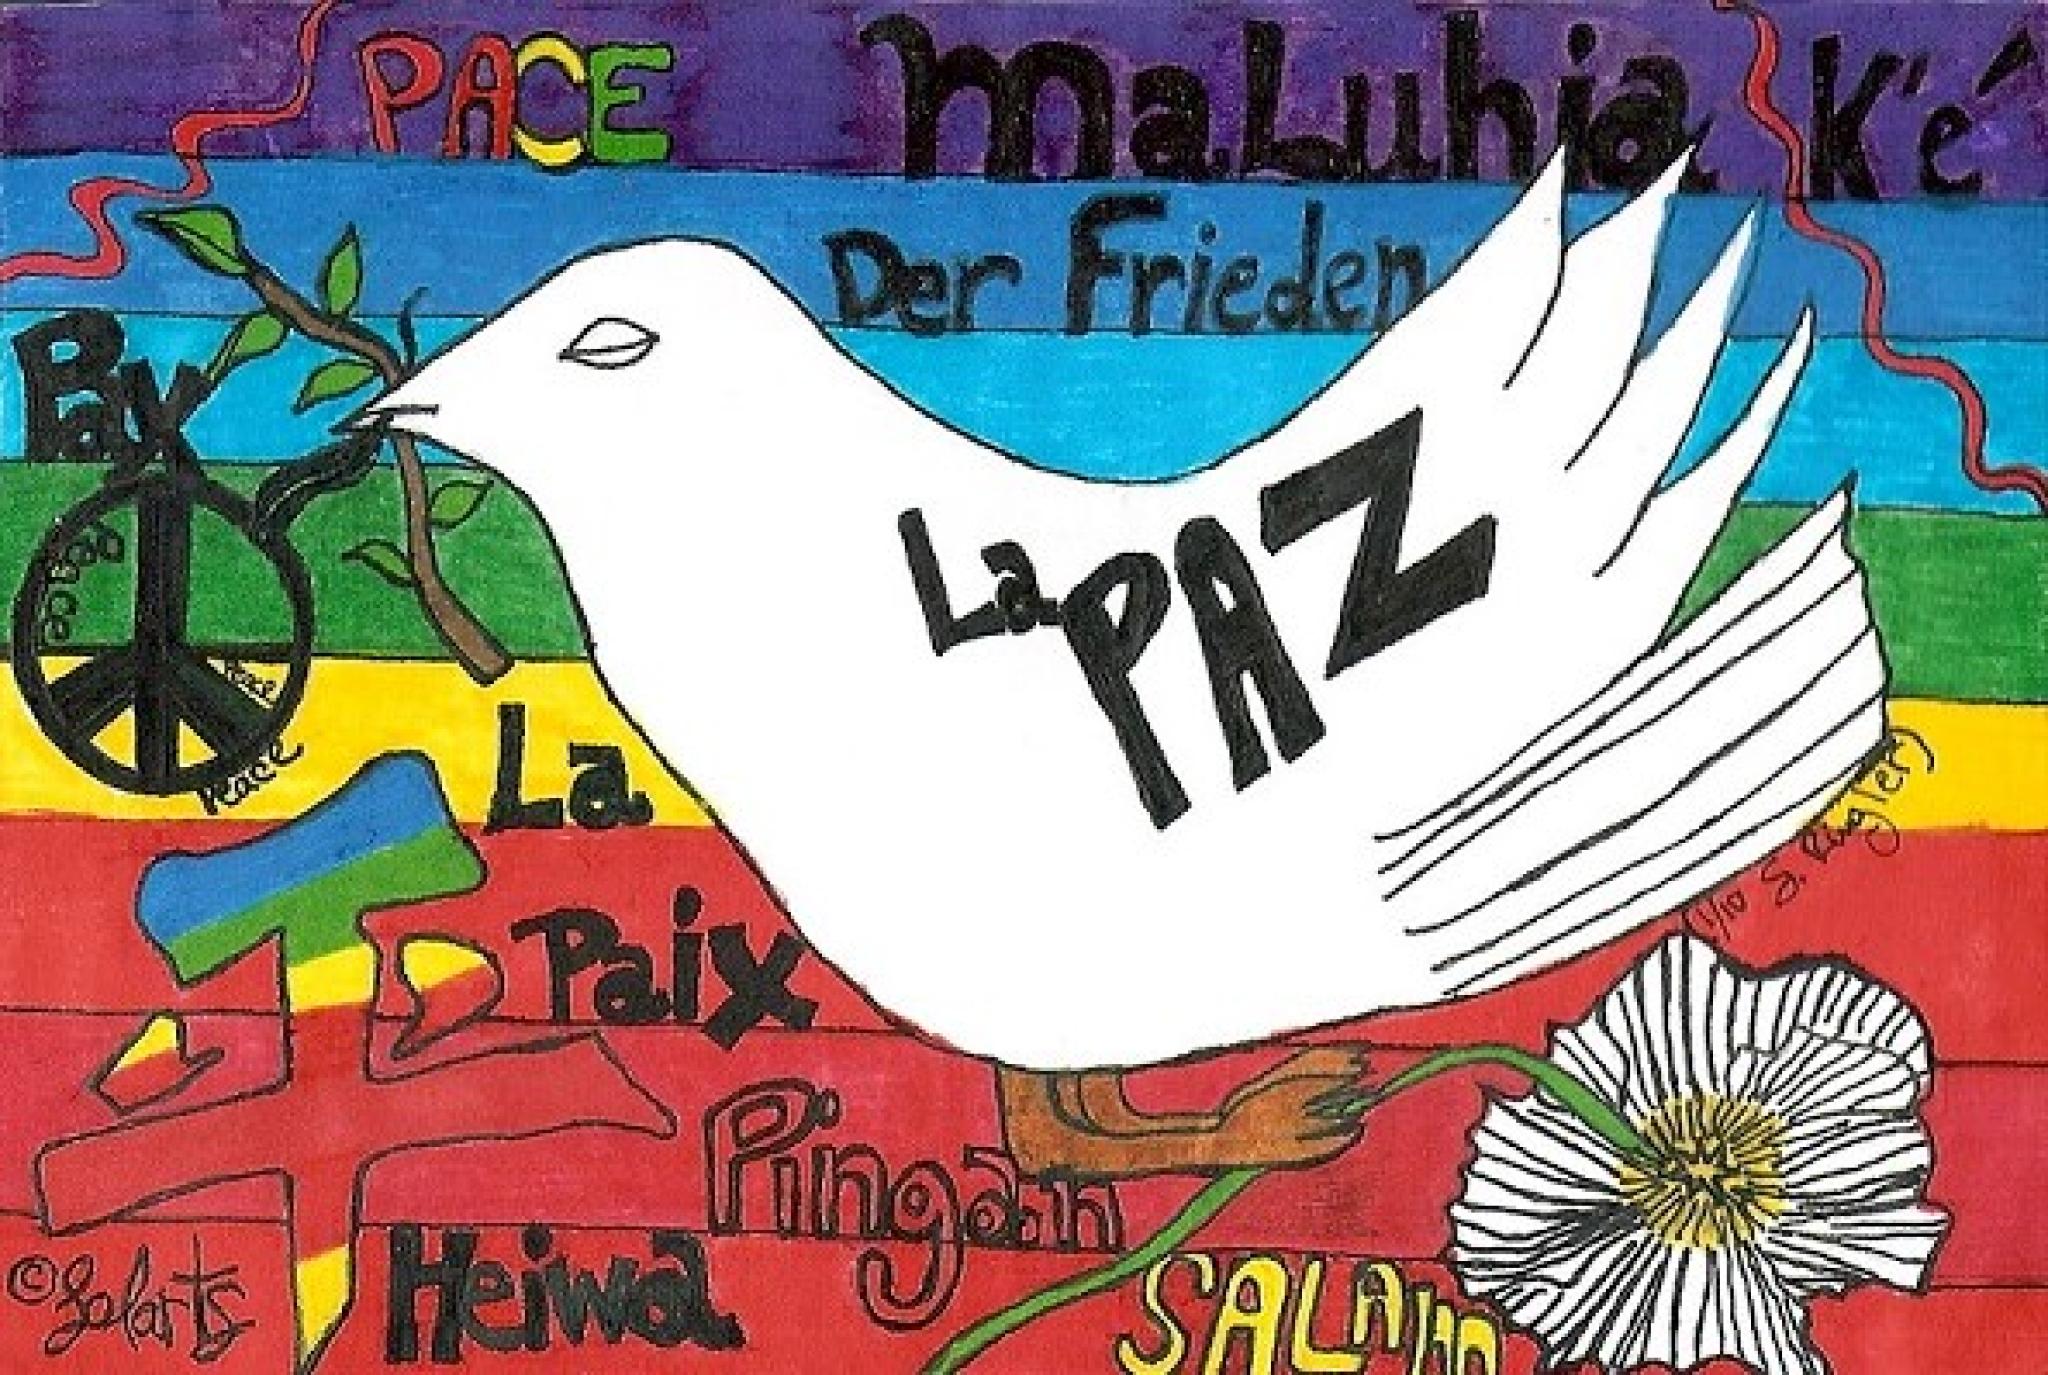 Image of handmade peace themed postcard with ‘peace’ in various languages by Stephanie at https://flic.kr/p/7v93W6 free to use under CC BY-ND 2.0 DEED licence 